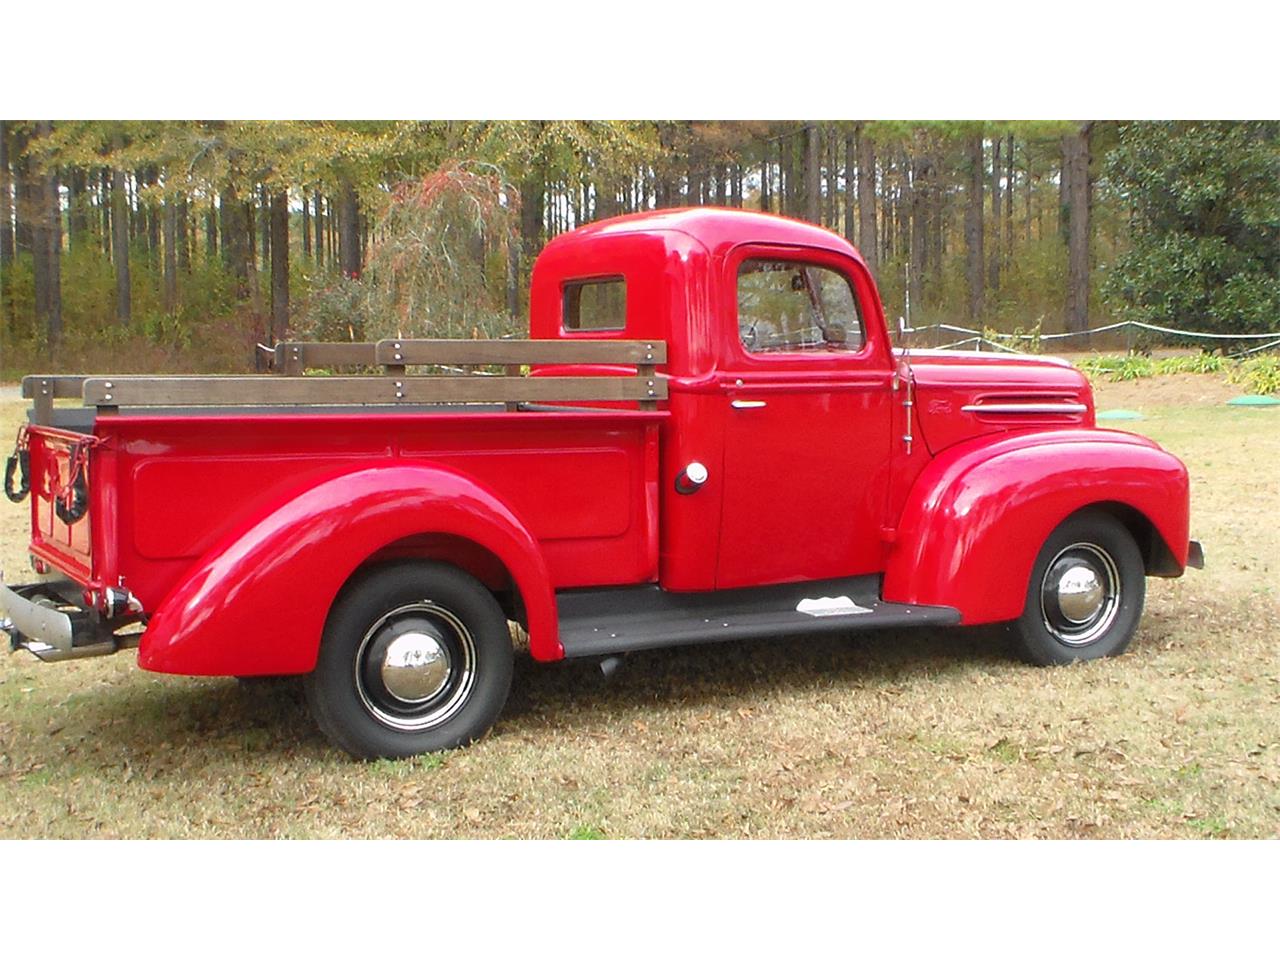 1946 Ford Pickup For Sale Classiccarscom Cc 996033